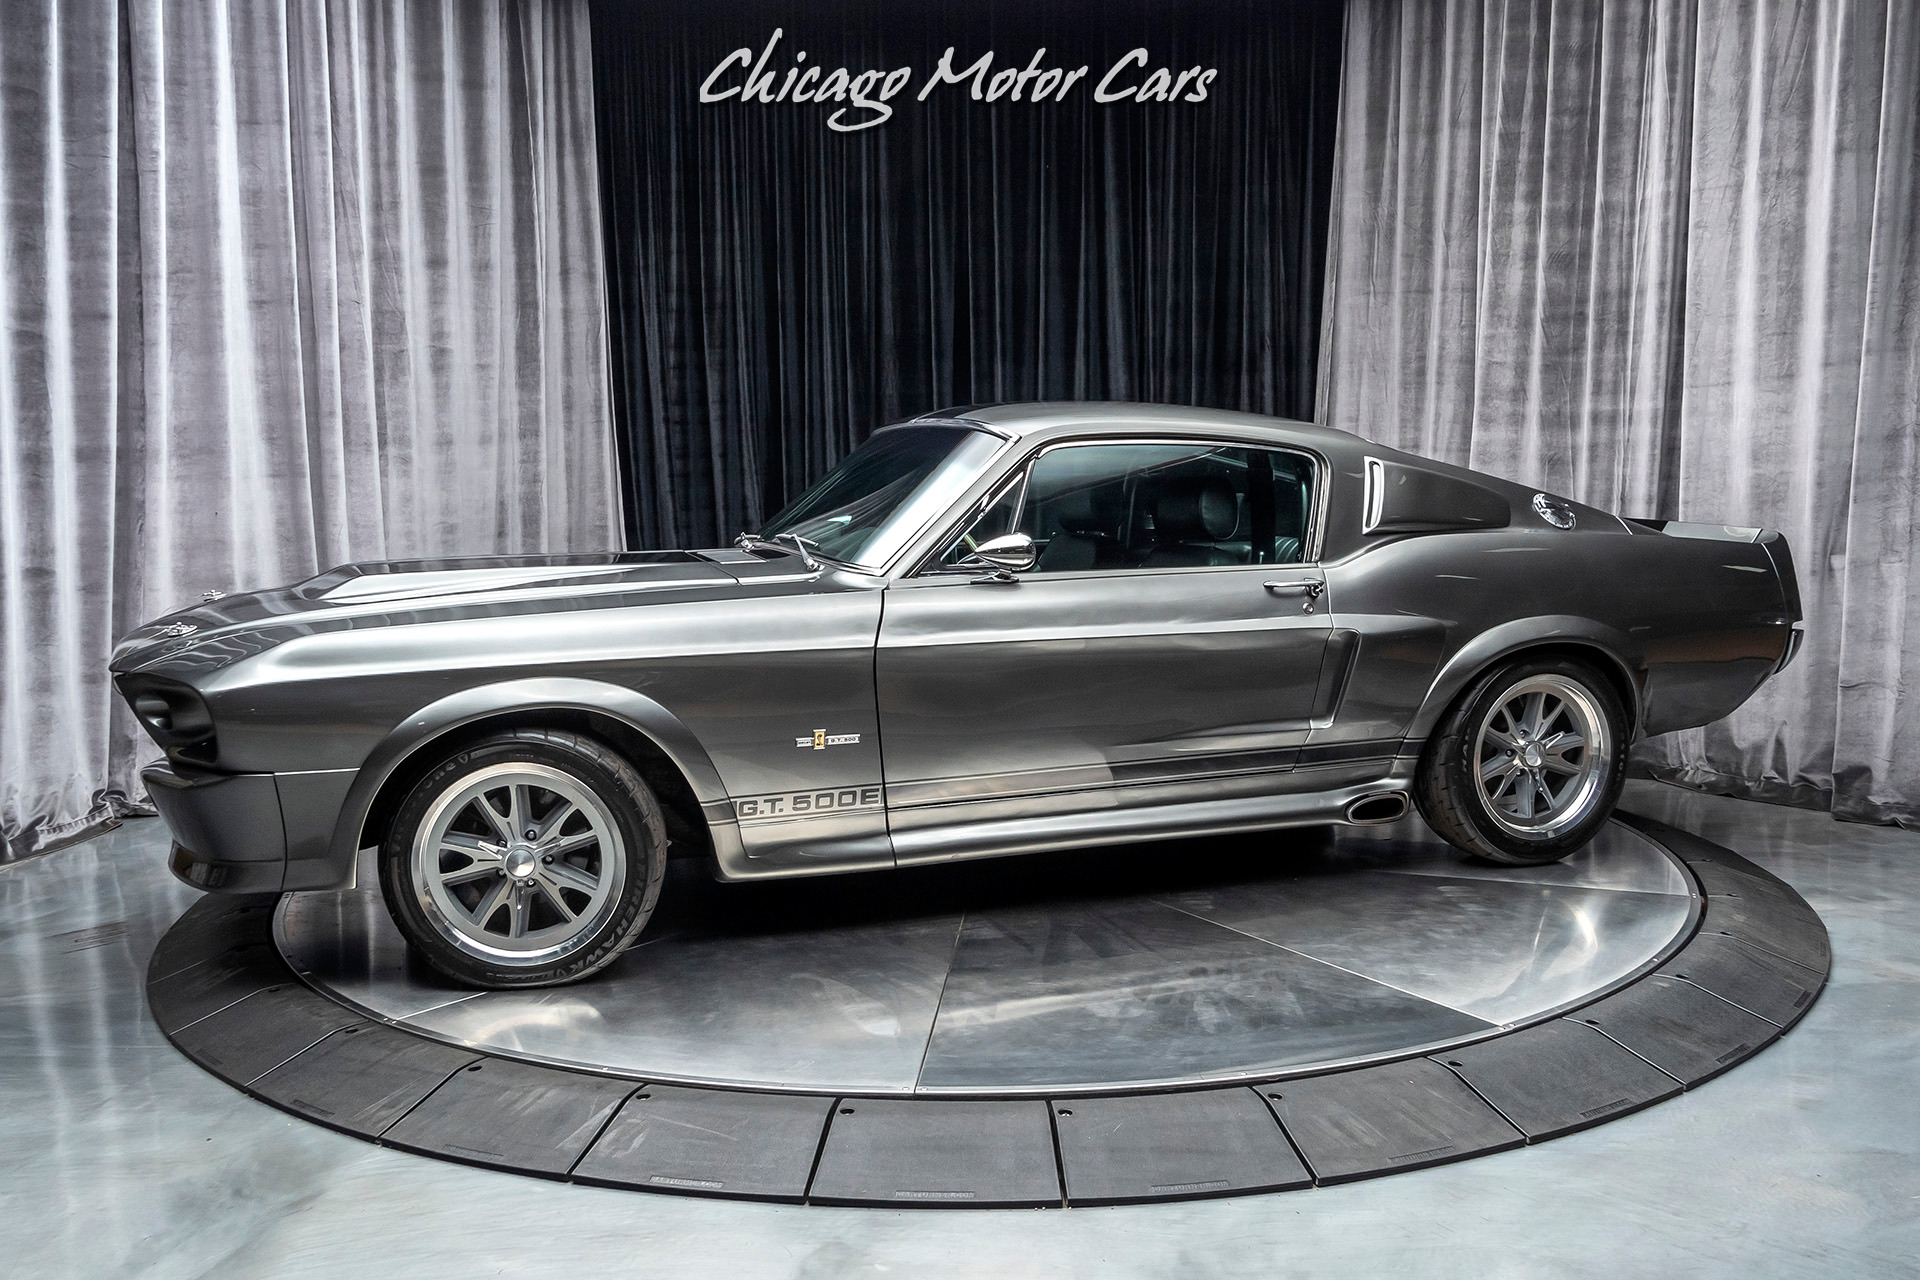 Used-1967-Ford-Mustang-Custom-Fastback-Coupe-GT500-Tribute